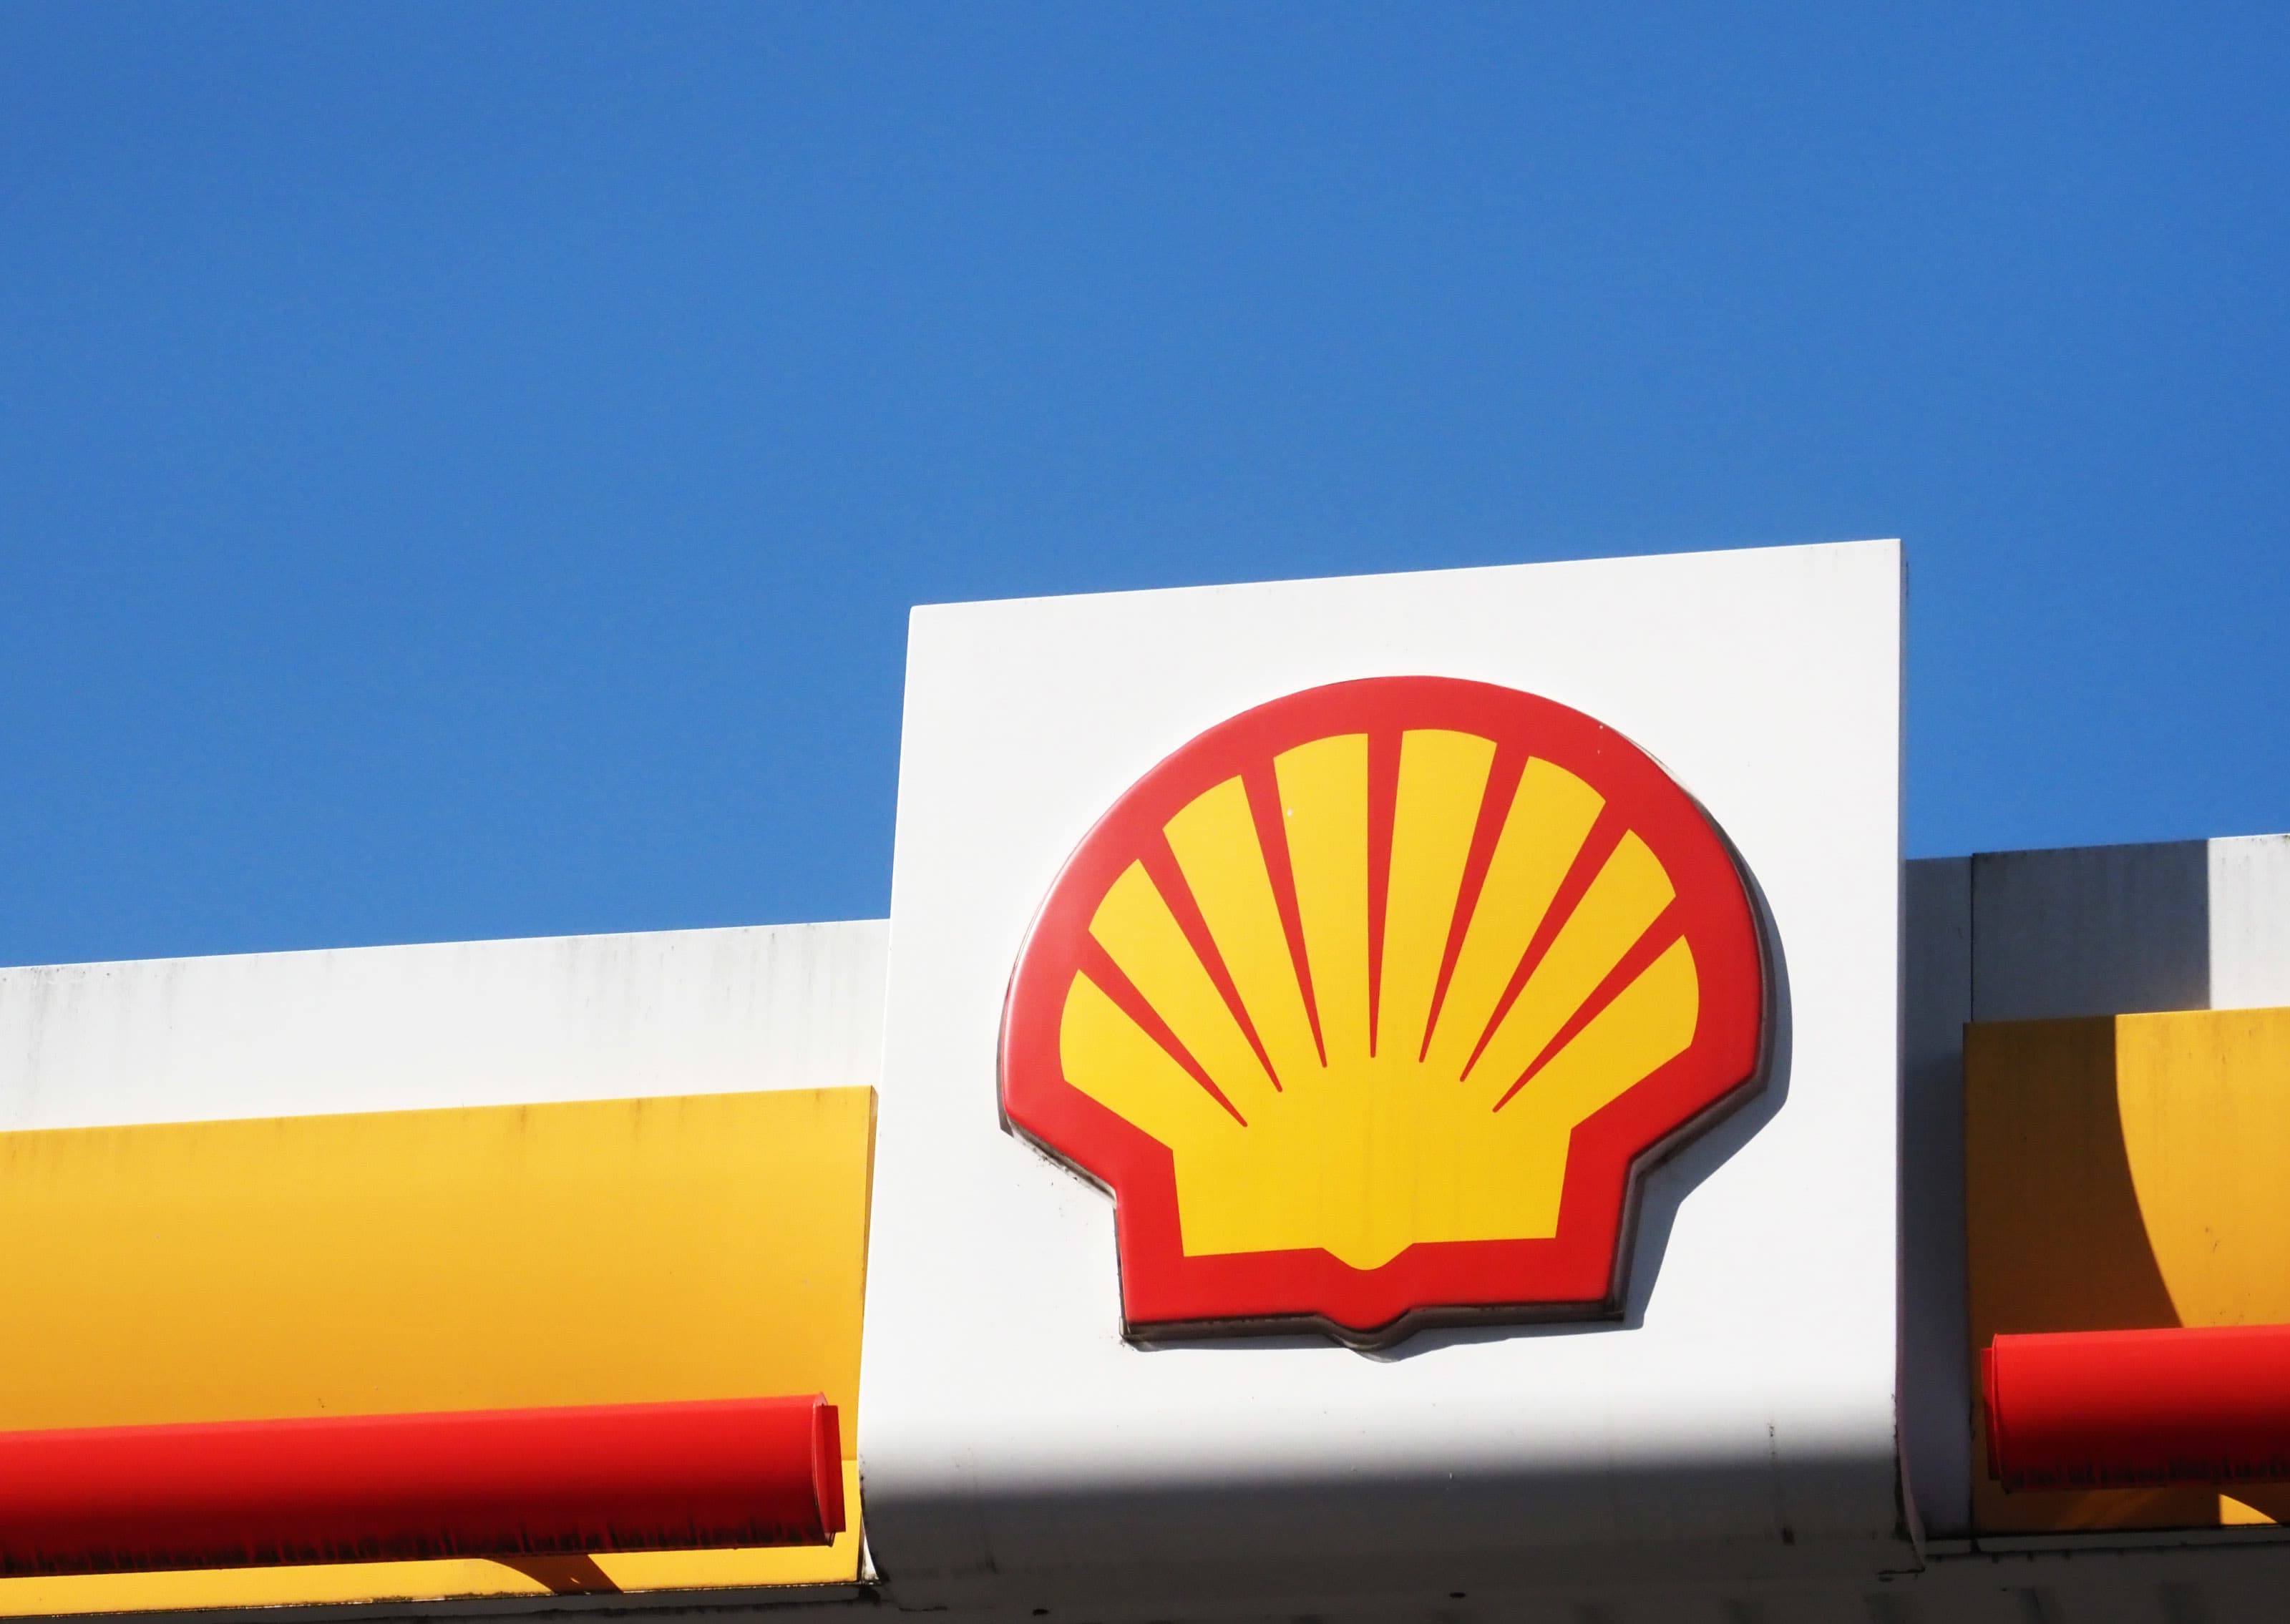 Shell beat expectations with a profit of $9.6 billion in the first quarter